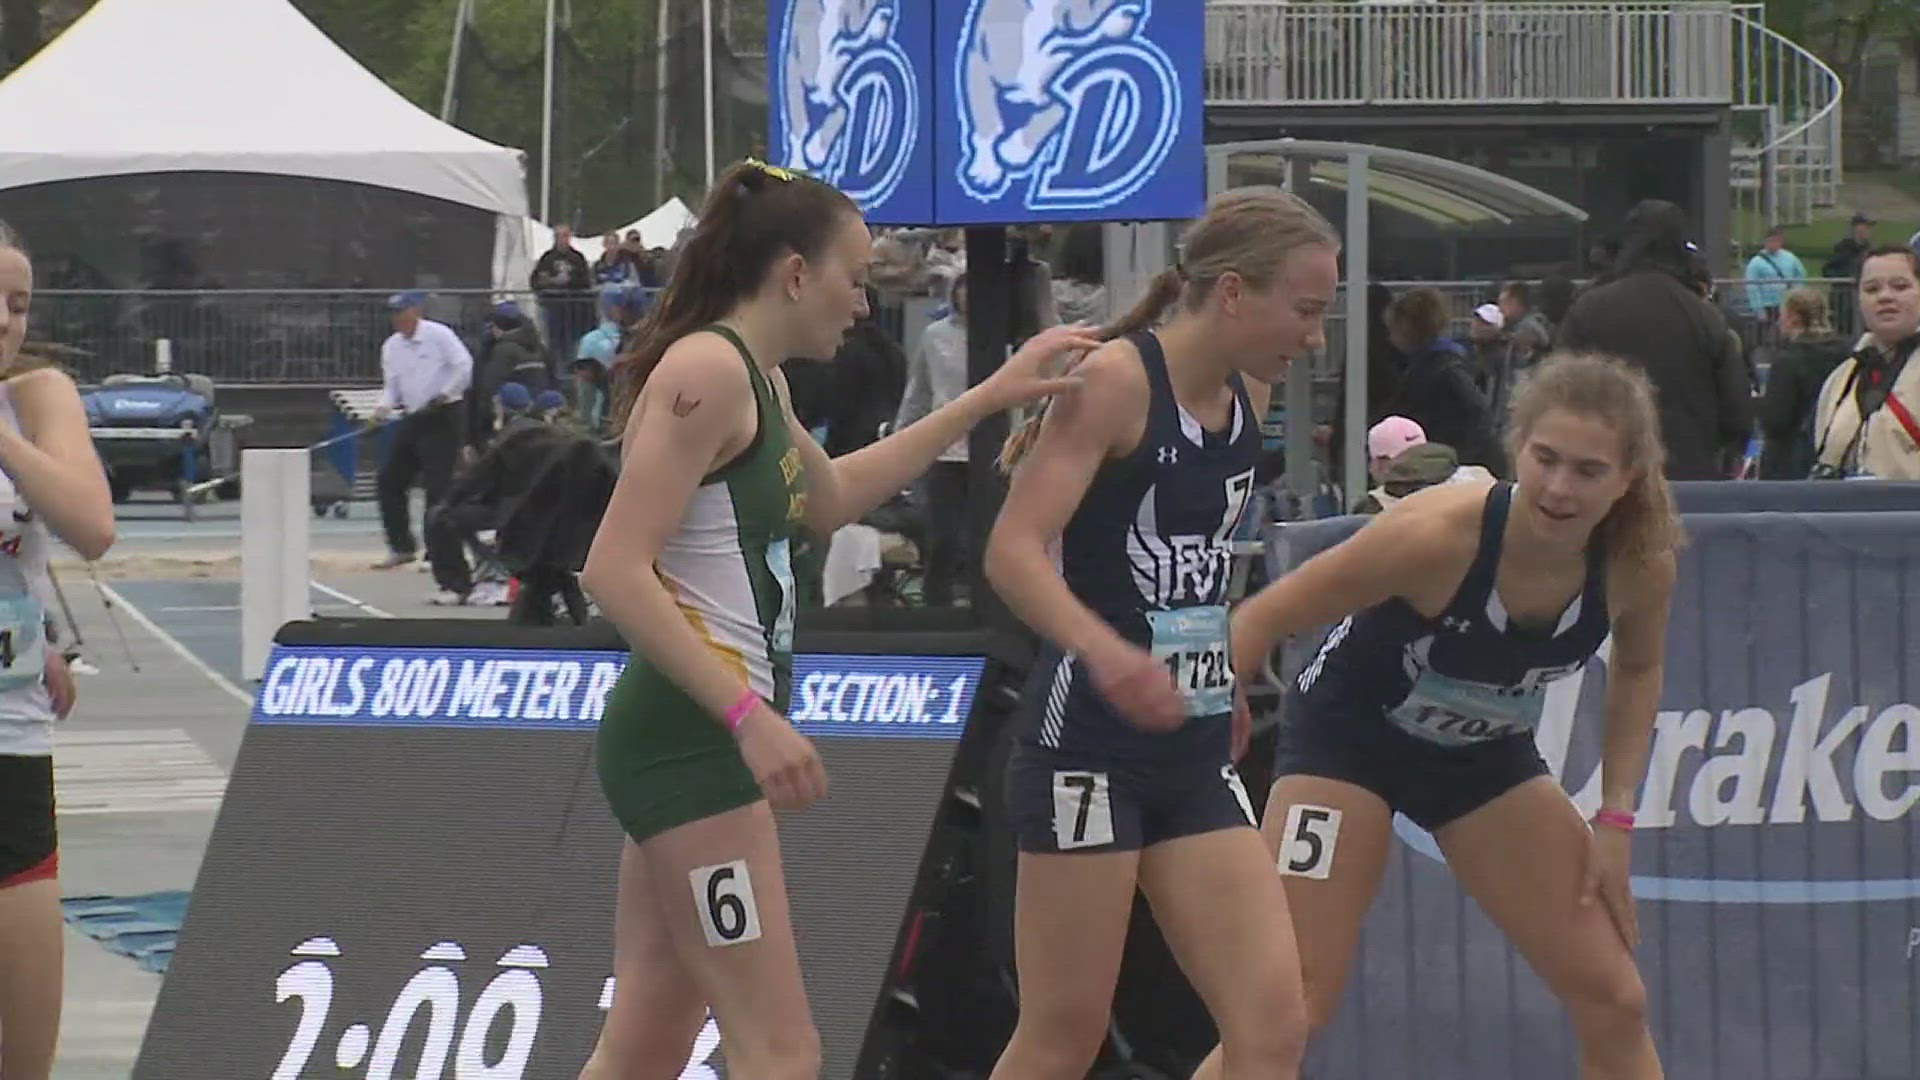 Numerous local track teams are in Des Moines this week for the Drake Relays.